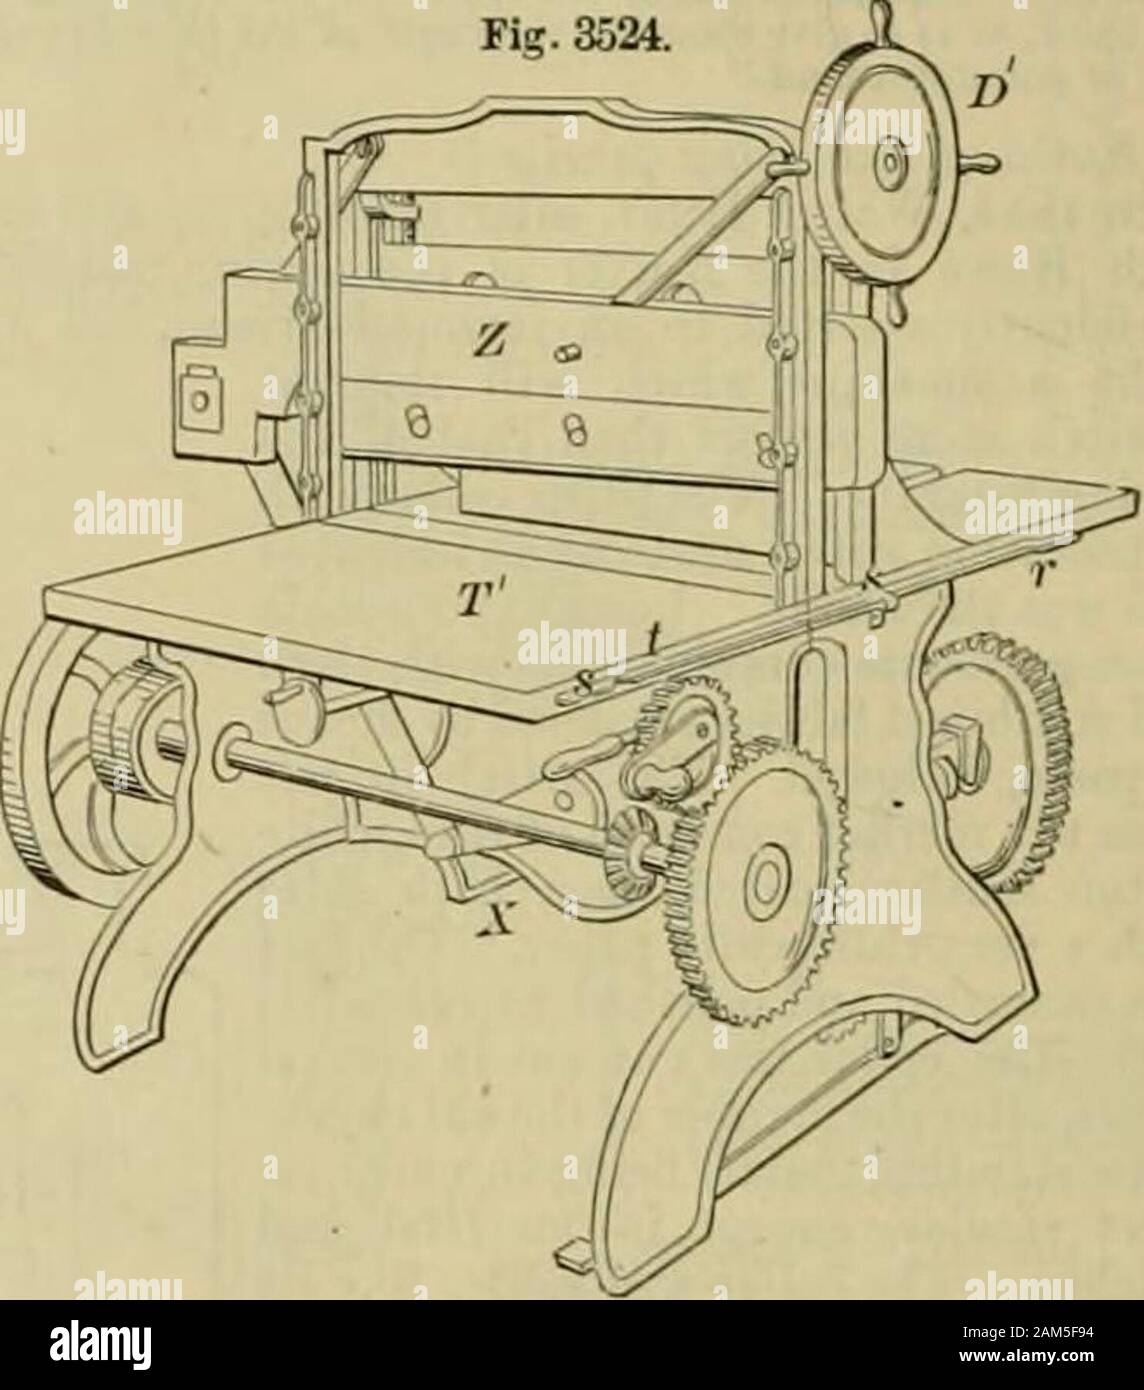 Knight's American mechanical dictionary : a description of tools, instruments, machines, processes and engineering, history of inventions, general technological vocabulary ; and digest of mechanical appliances in science and the arts . is susjiendedfrom a horizontal cross-piece at the top of the frameby means of two toggles or swinging-bars, wliich,when the cutter-stock is elevated, as shown in theengraving, occupy an inclined position. The cutter-stock is connected by a pitman with a crank arrangedunderneath the table, and rotated when the appara-tus is in use by a belt-wheel operating throug Stock Photo